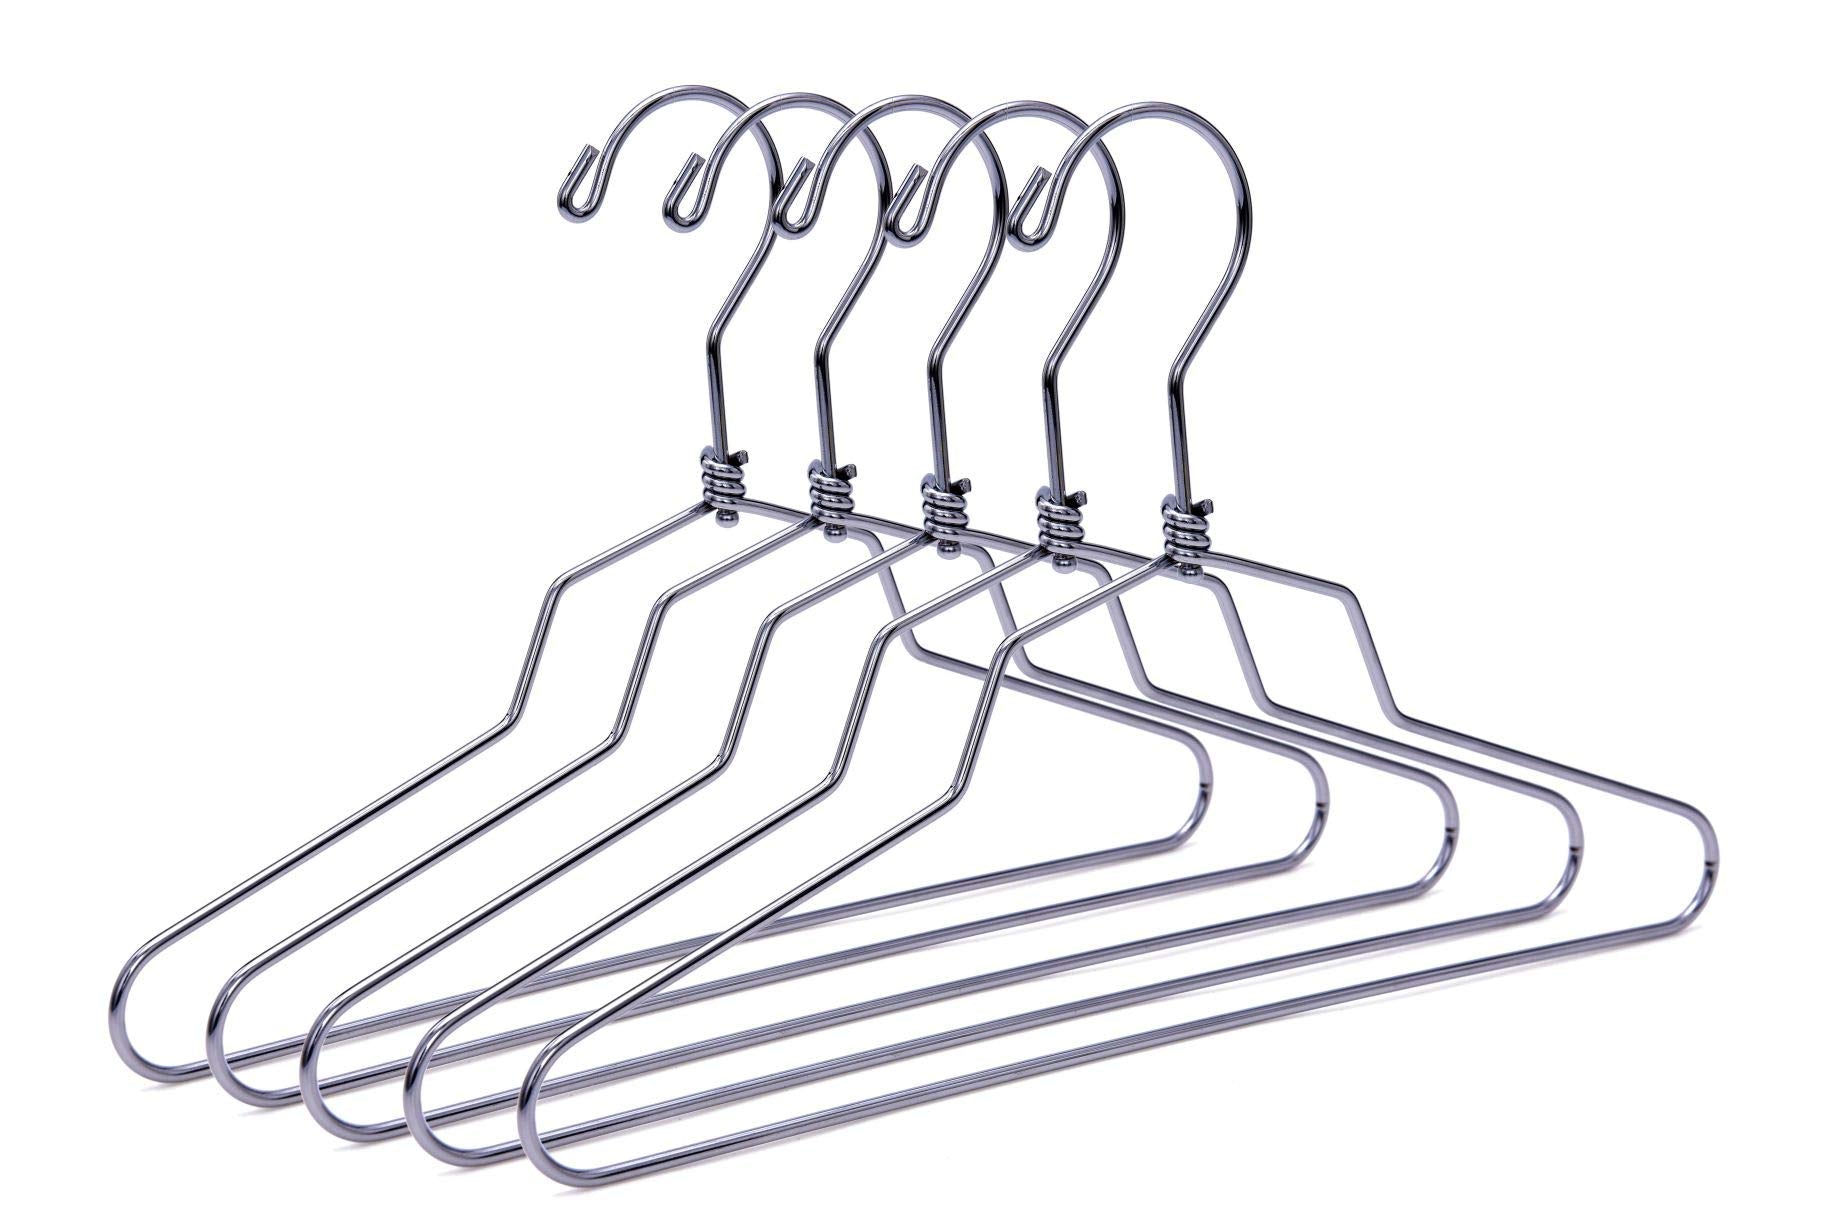 10 Quality Metal Hangers, Swivel Hook, Stainless Steel Heavy Duty Wire Clothes Hangers